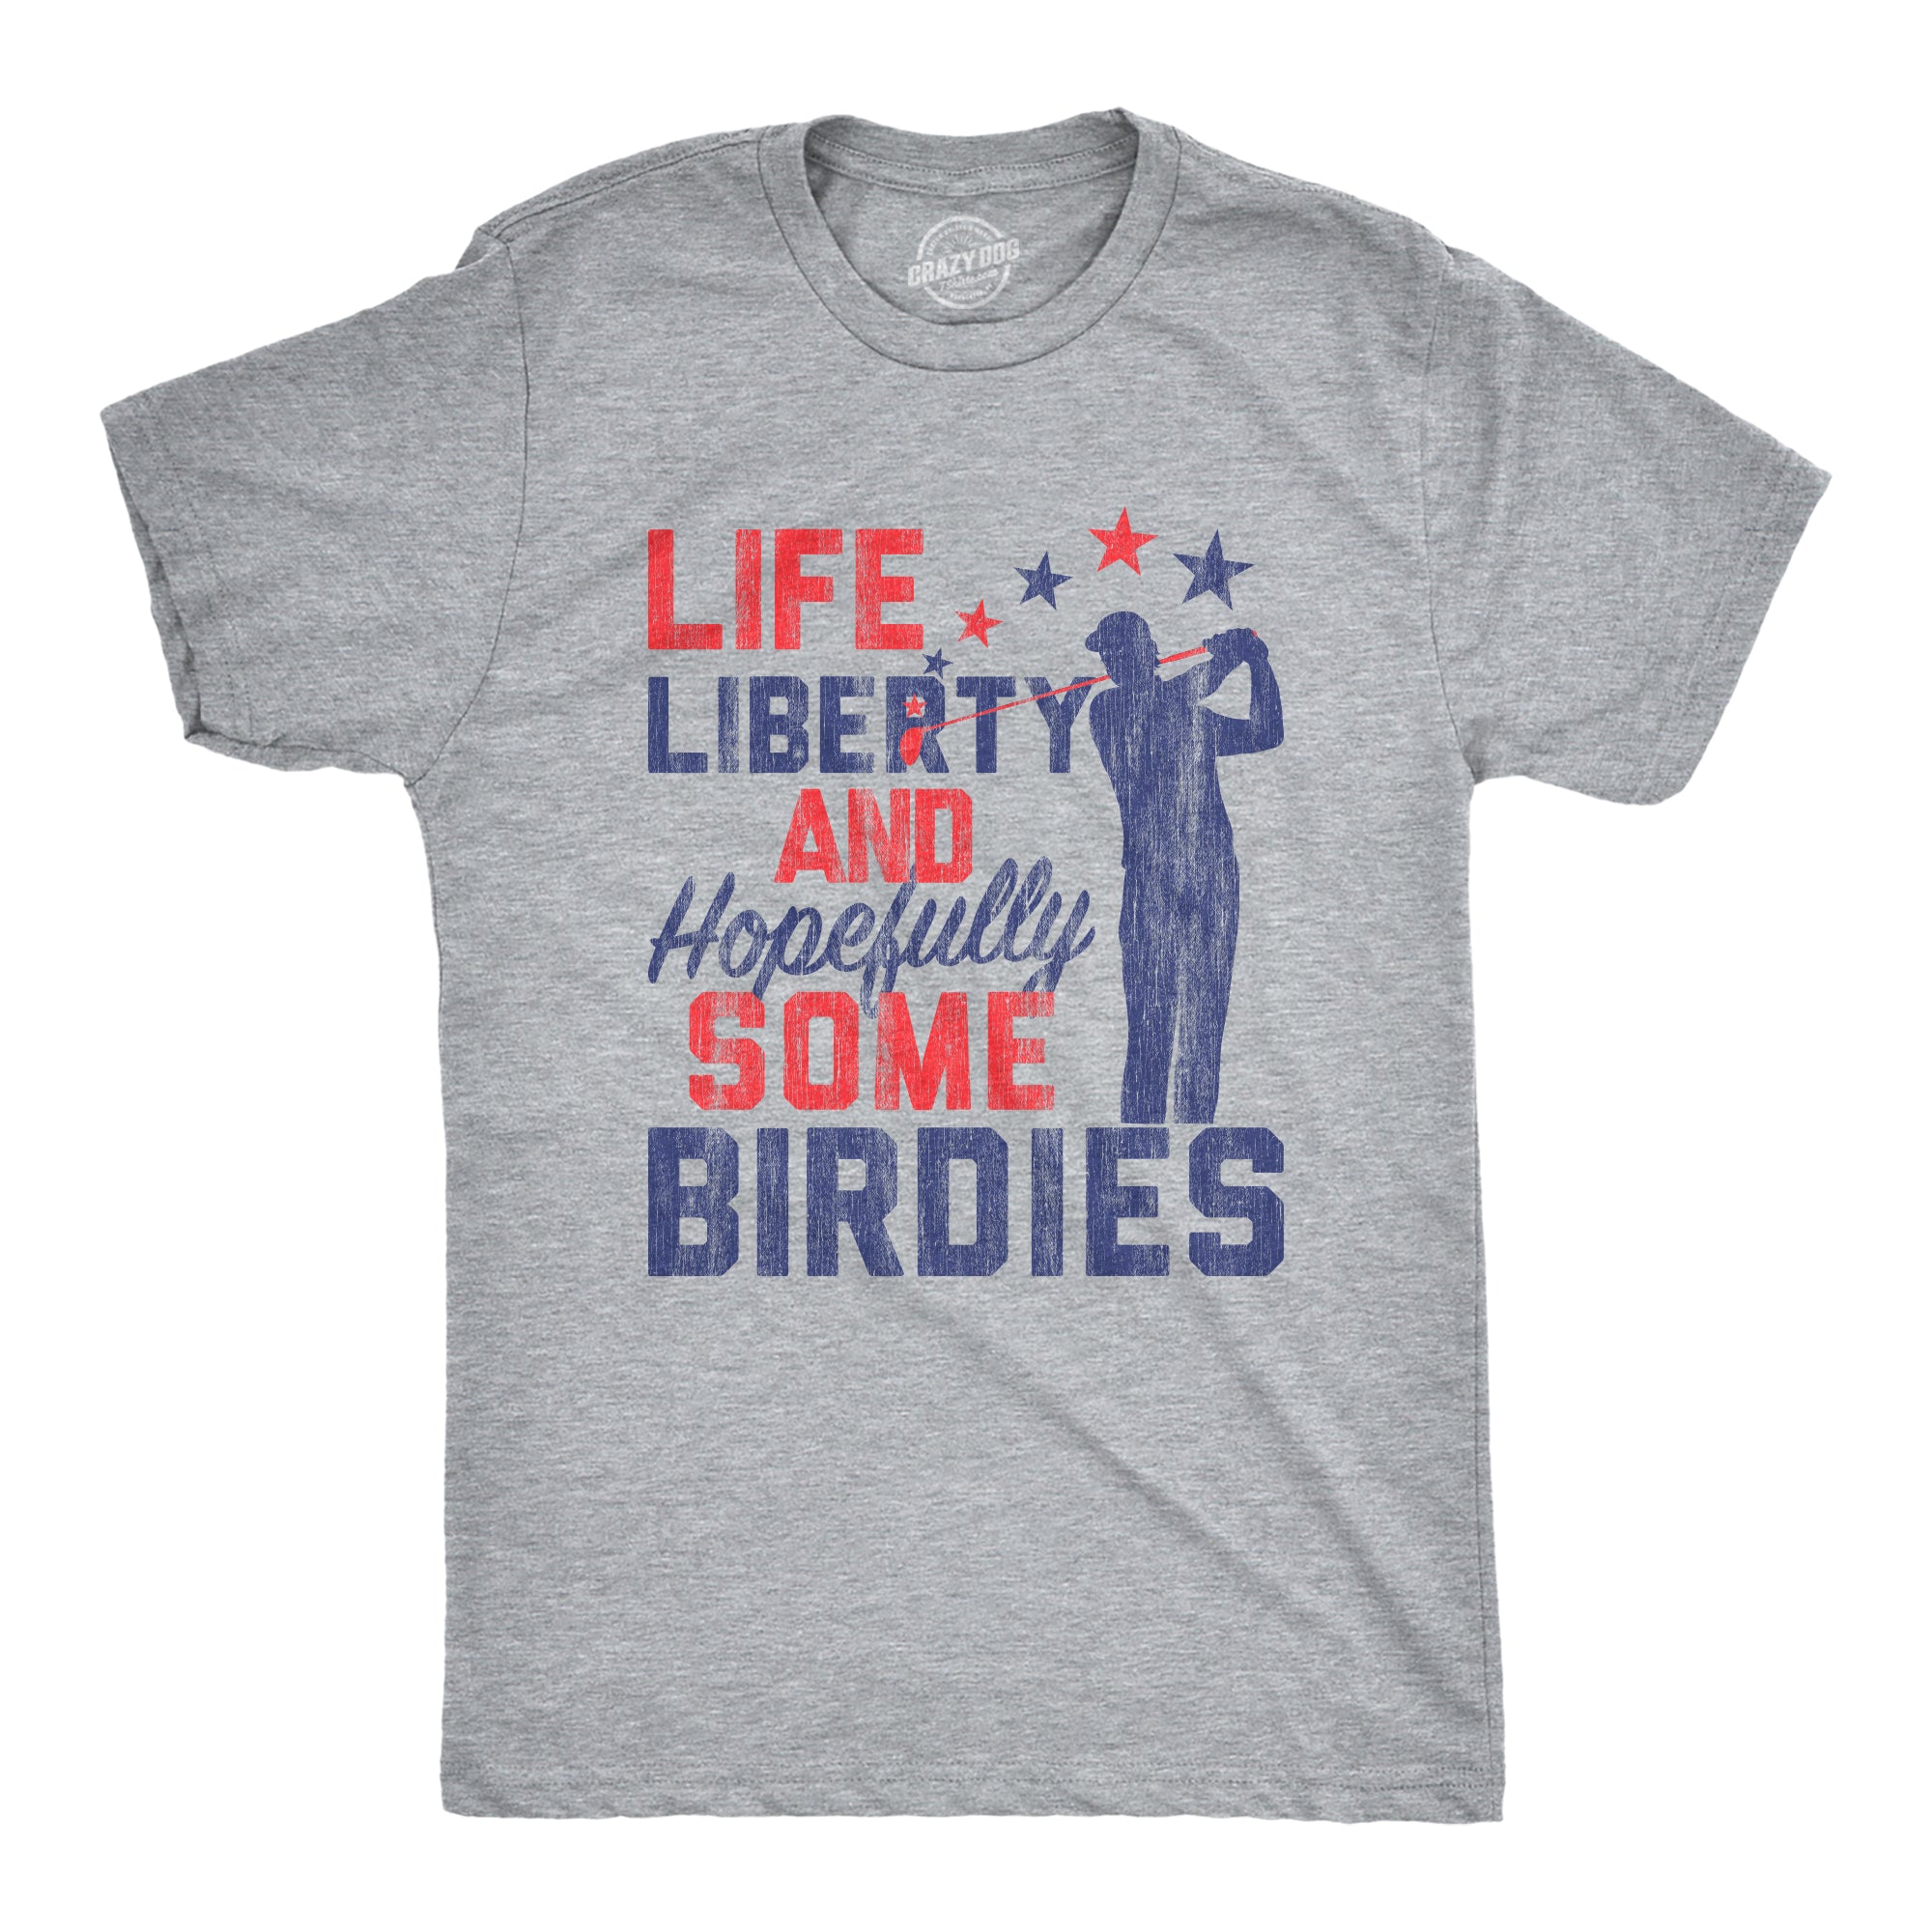 Funny Light Heather Grey Life, Liberty, And Hopefully Some Birdies Mens T Shirt Nerdy Fourth Of July Golf Tee